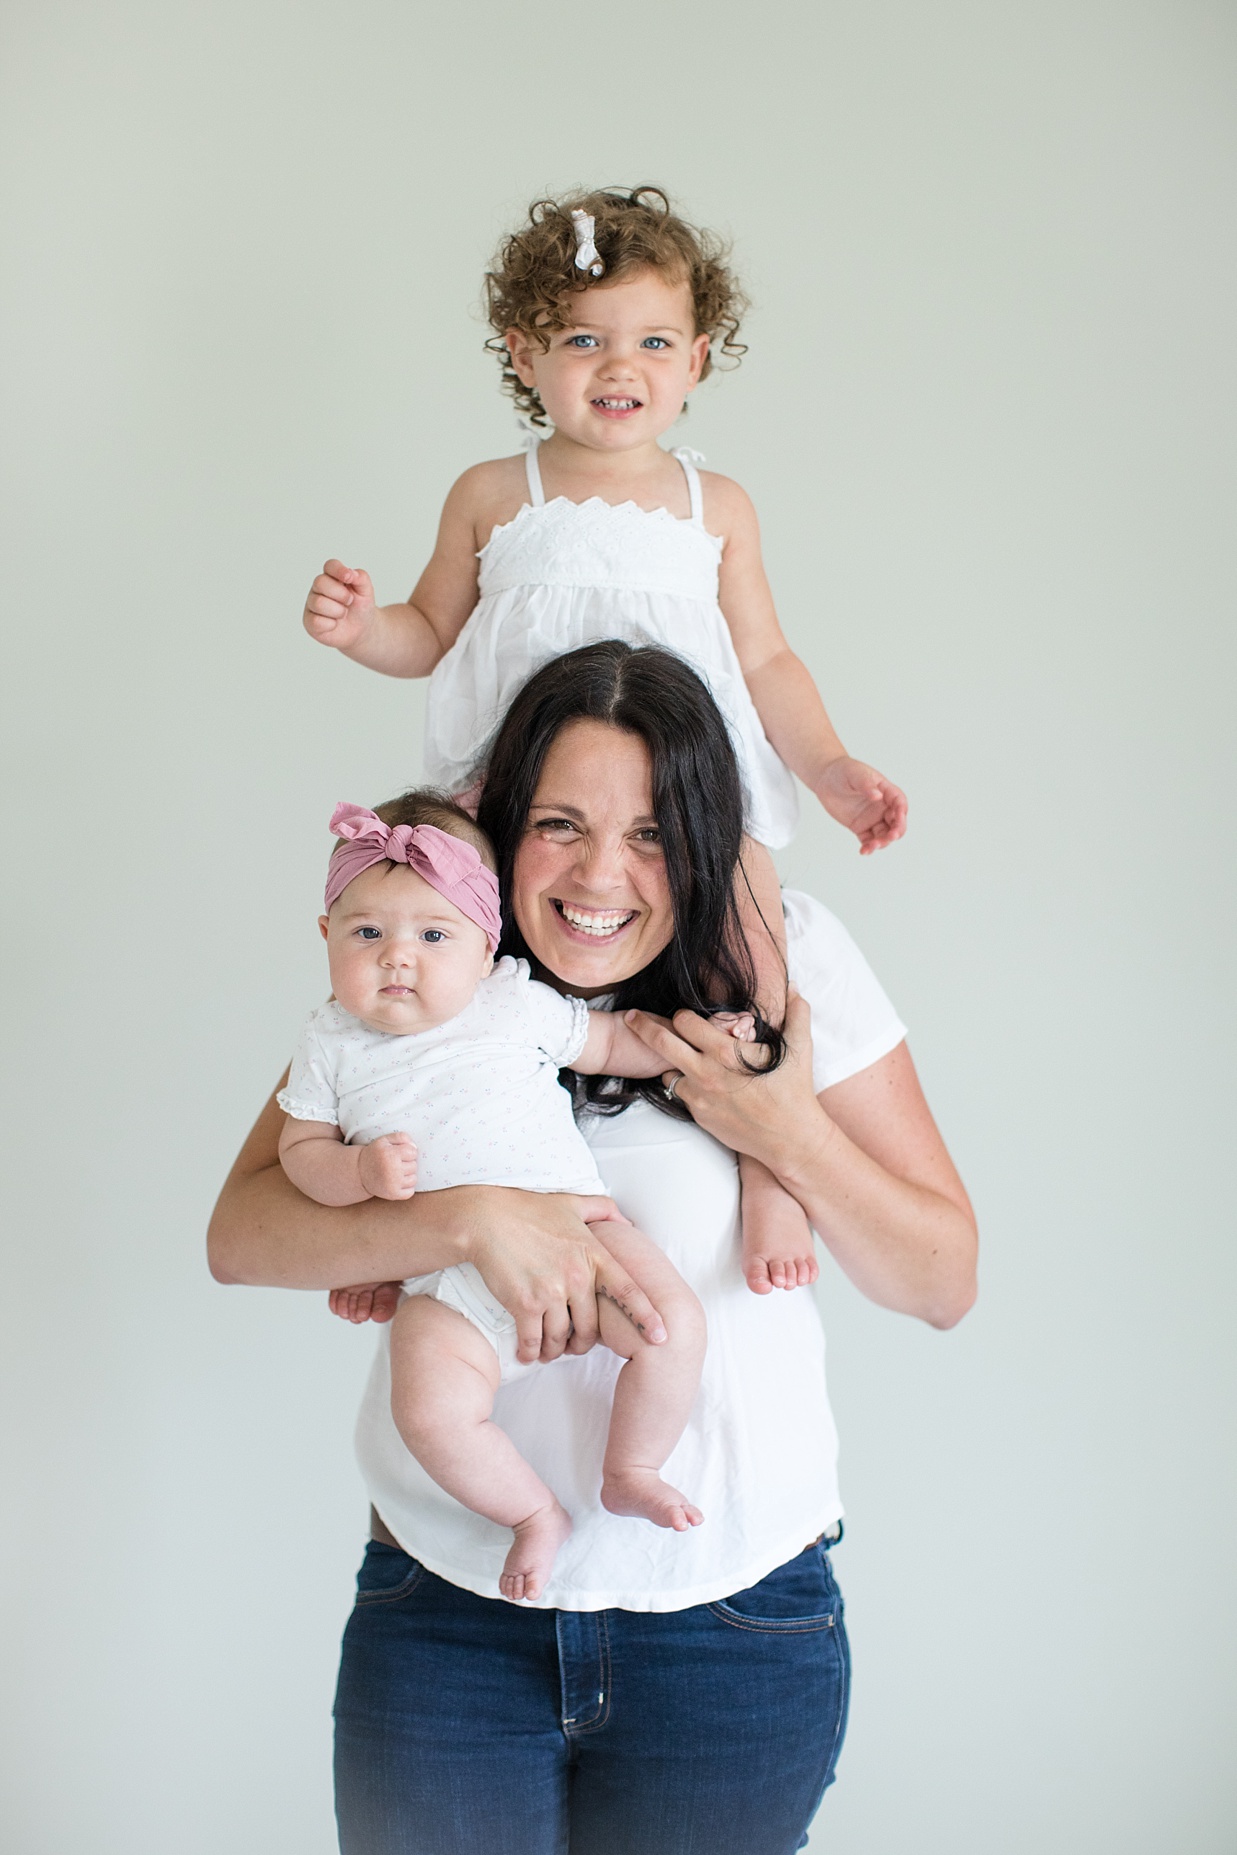 Mindy Danelle Photography - Playdate